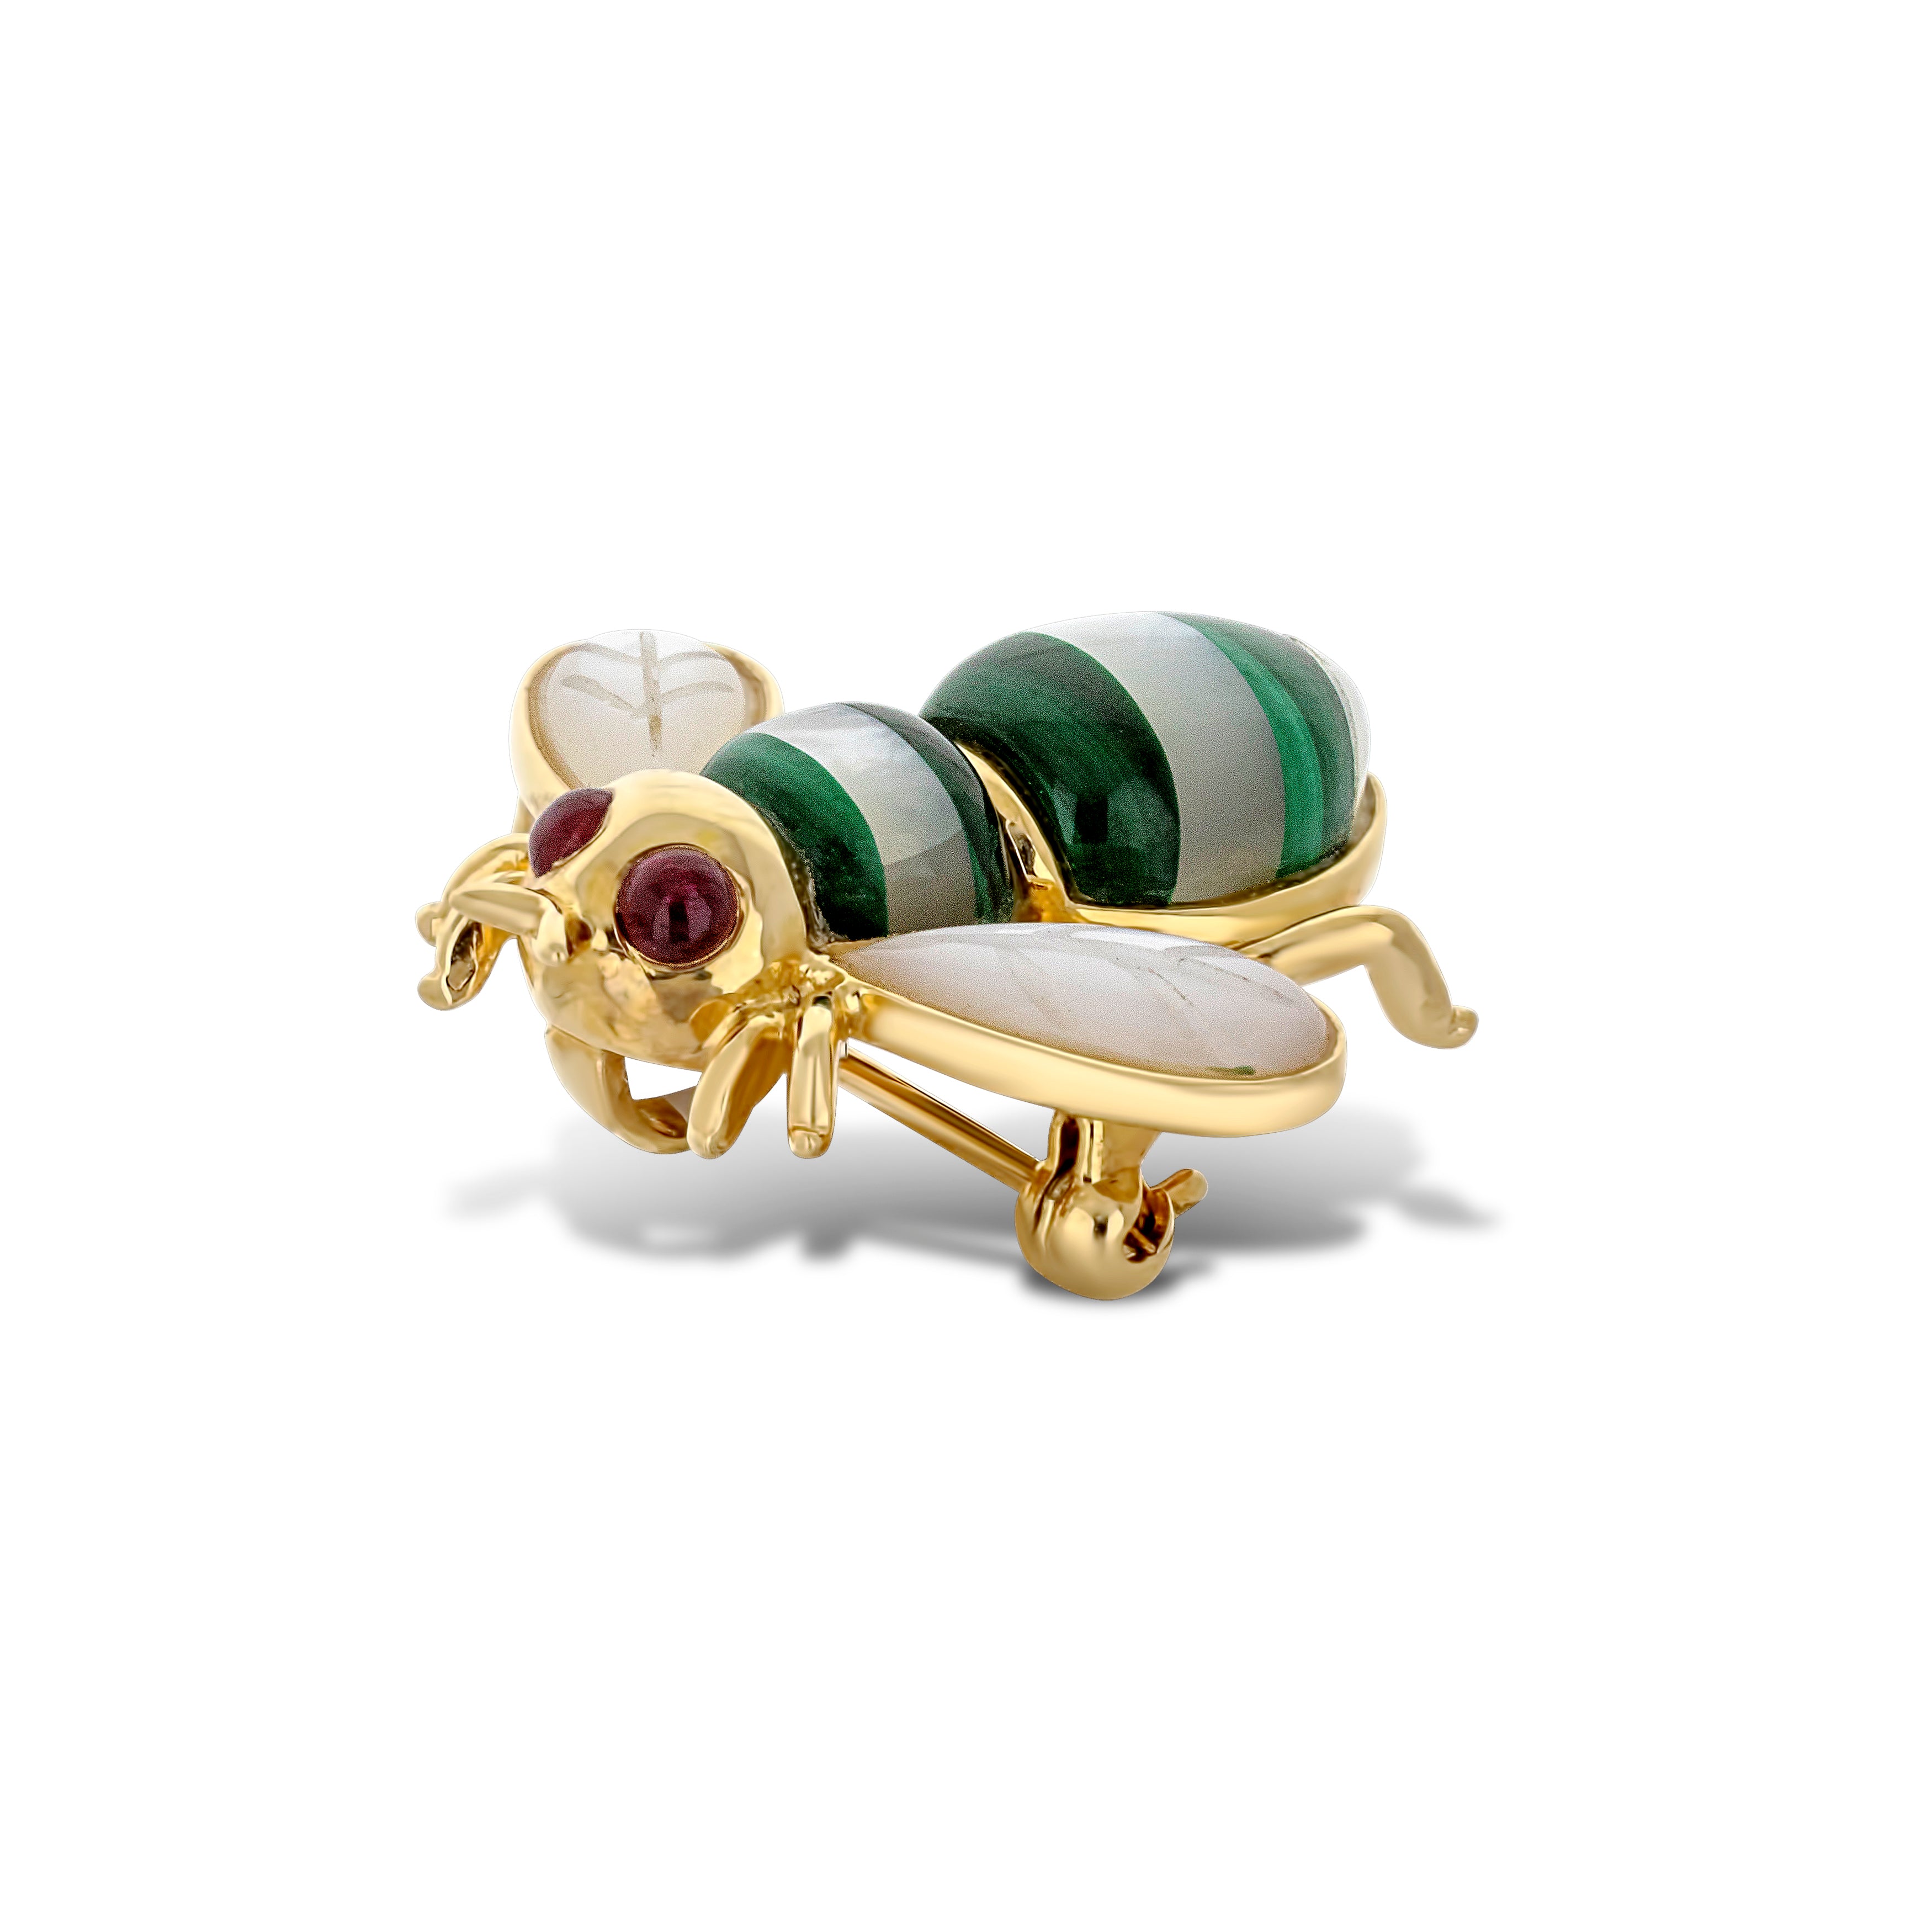 14K Yellow Gold Bee with Ruby Eyes Pin